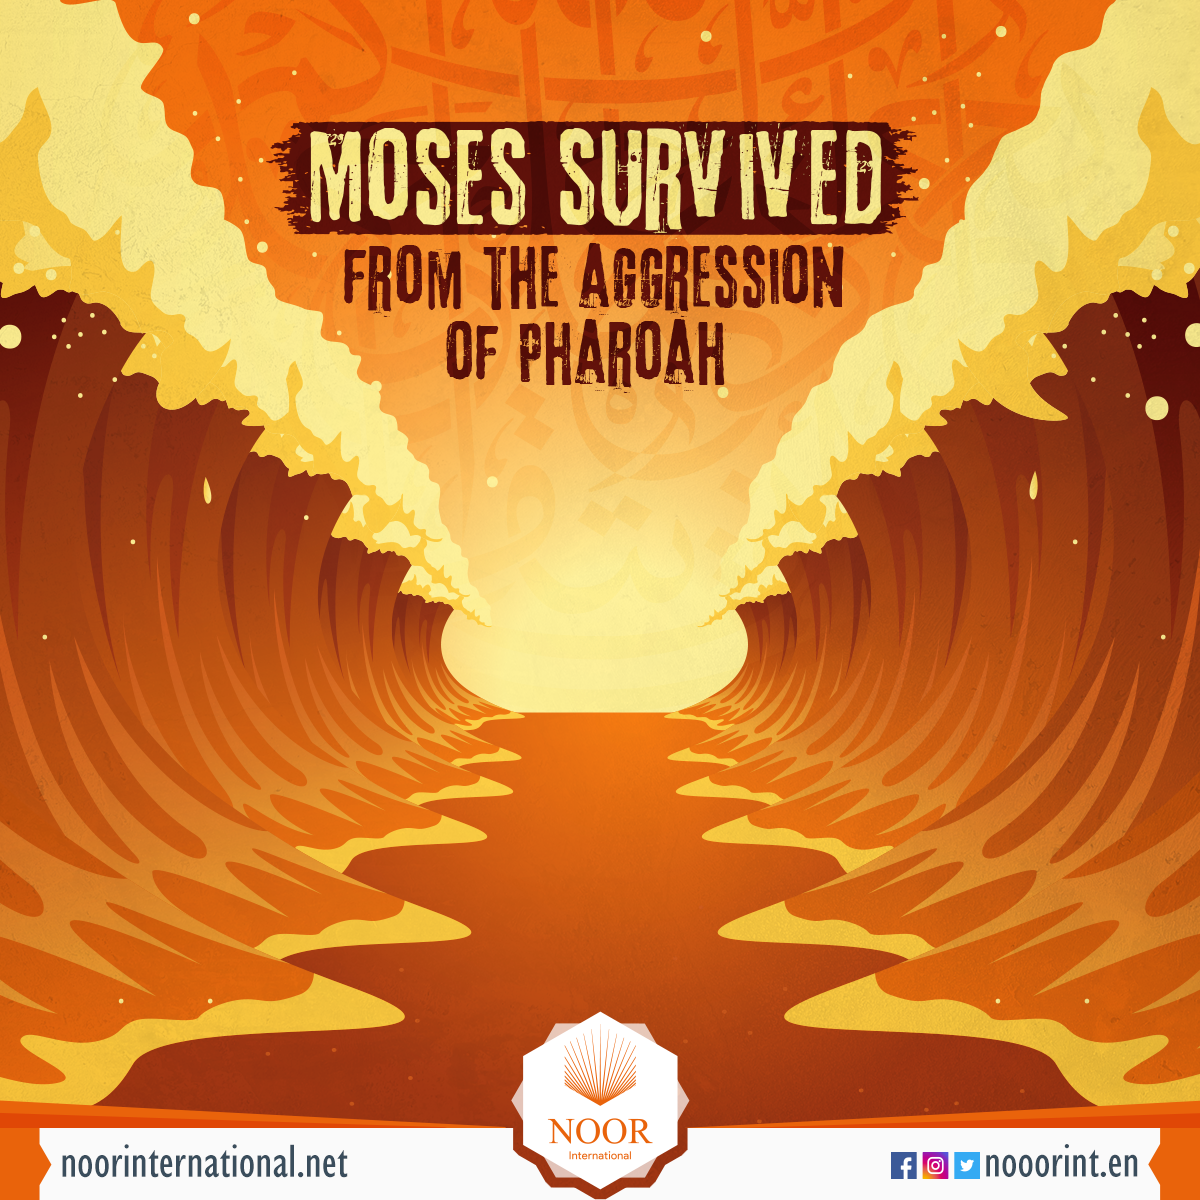 Moses survived from the aggression of Pharoah